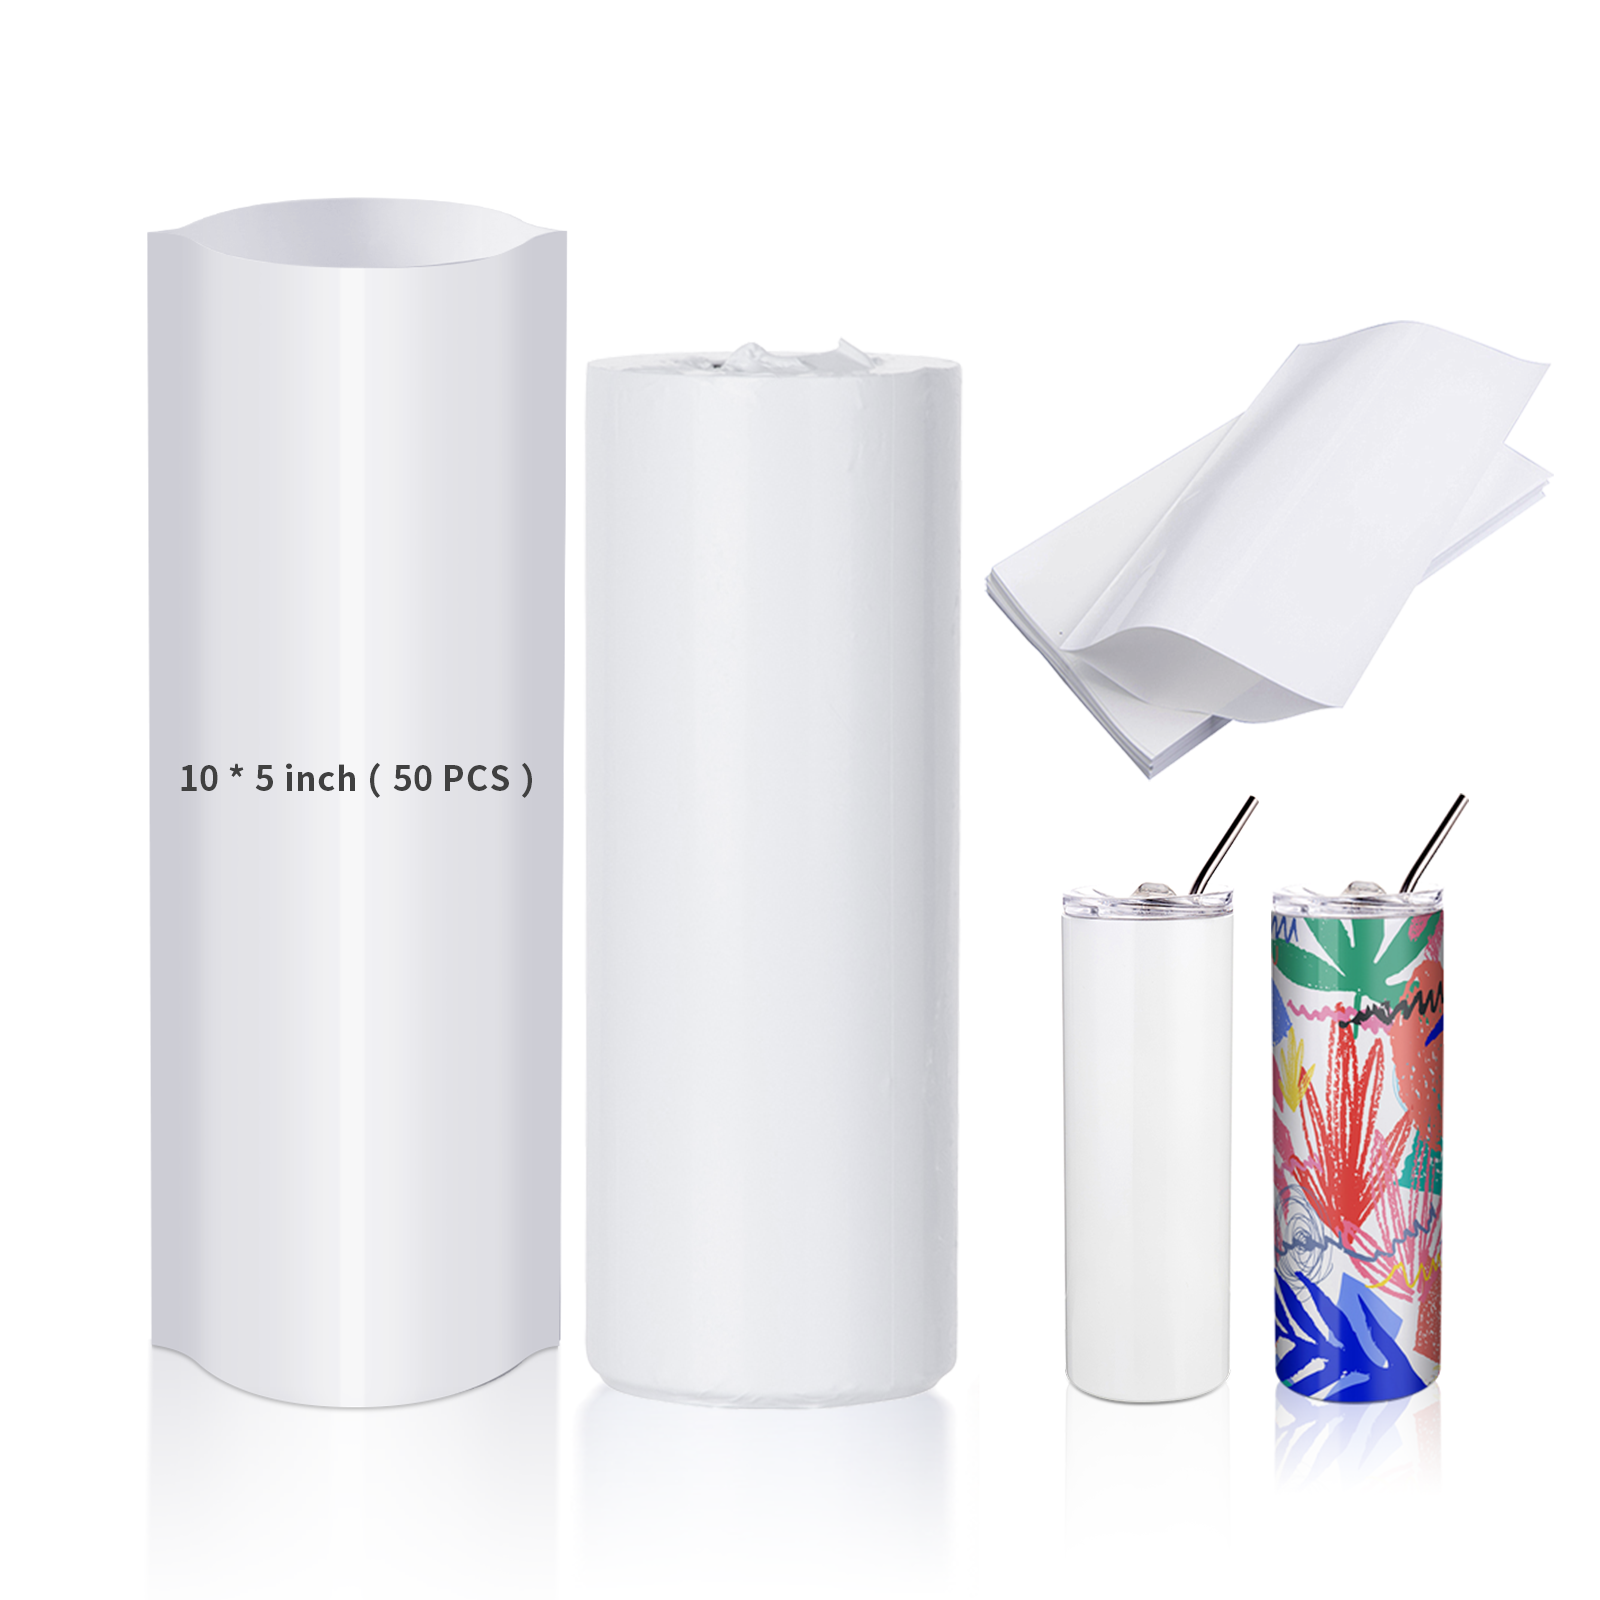 Sublimation Shrink Wrap Sleeves - Sublimation Tools - Quick Blanks